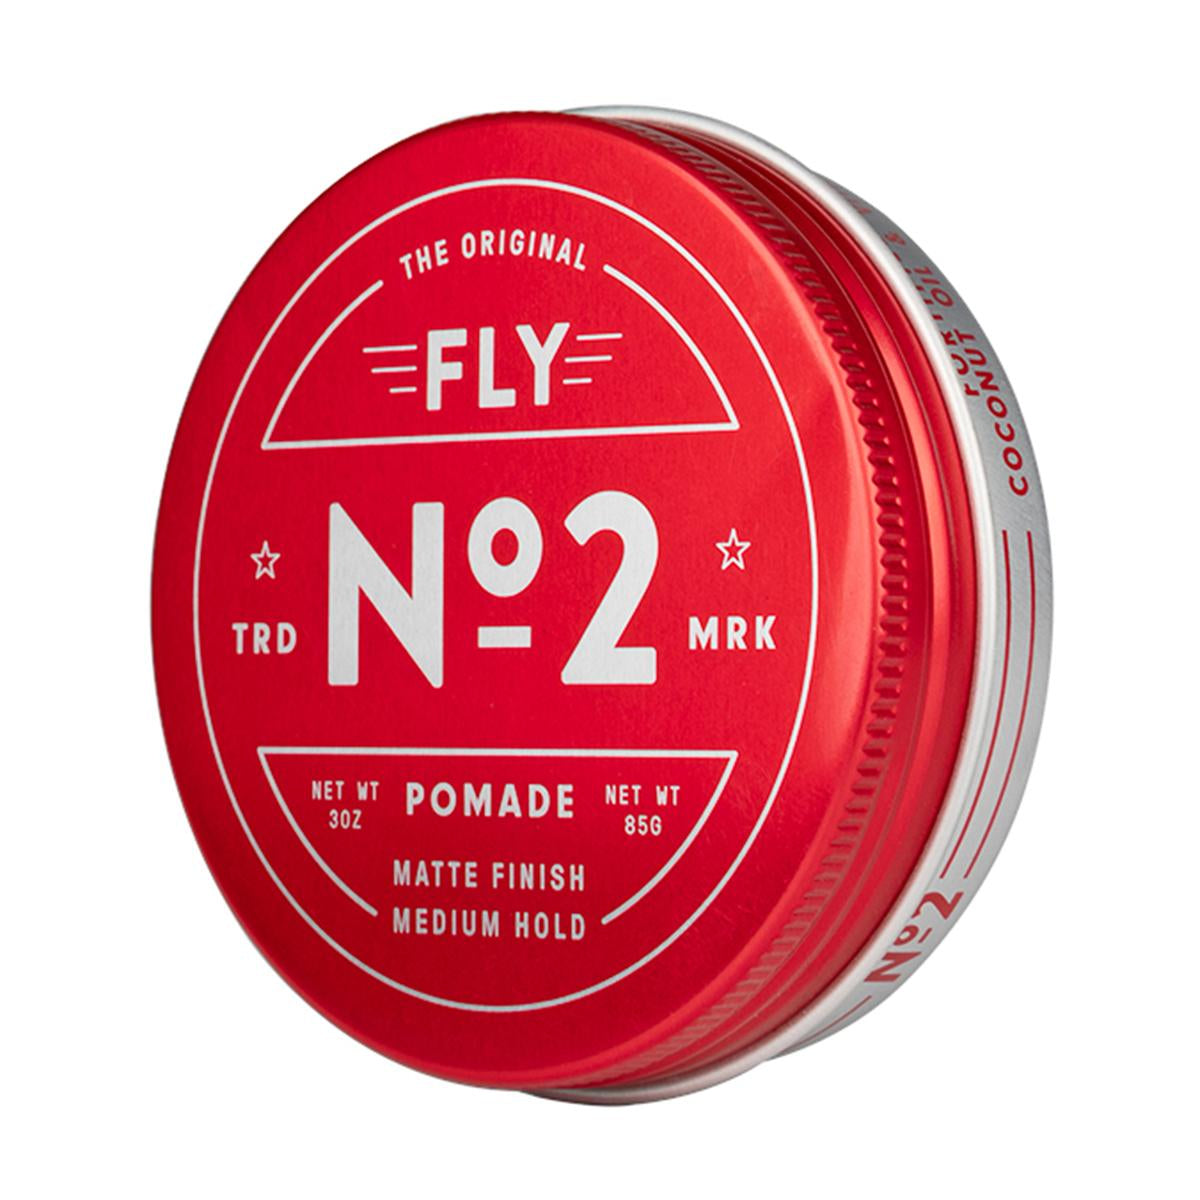 Primary image of Pomade No. 2